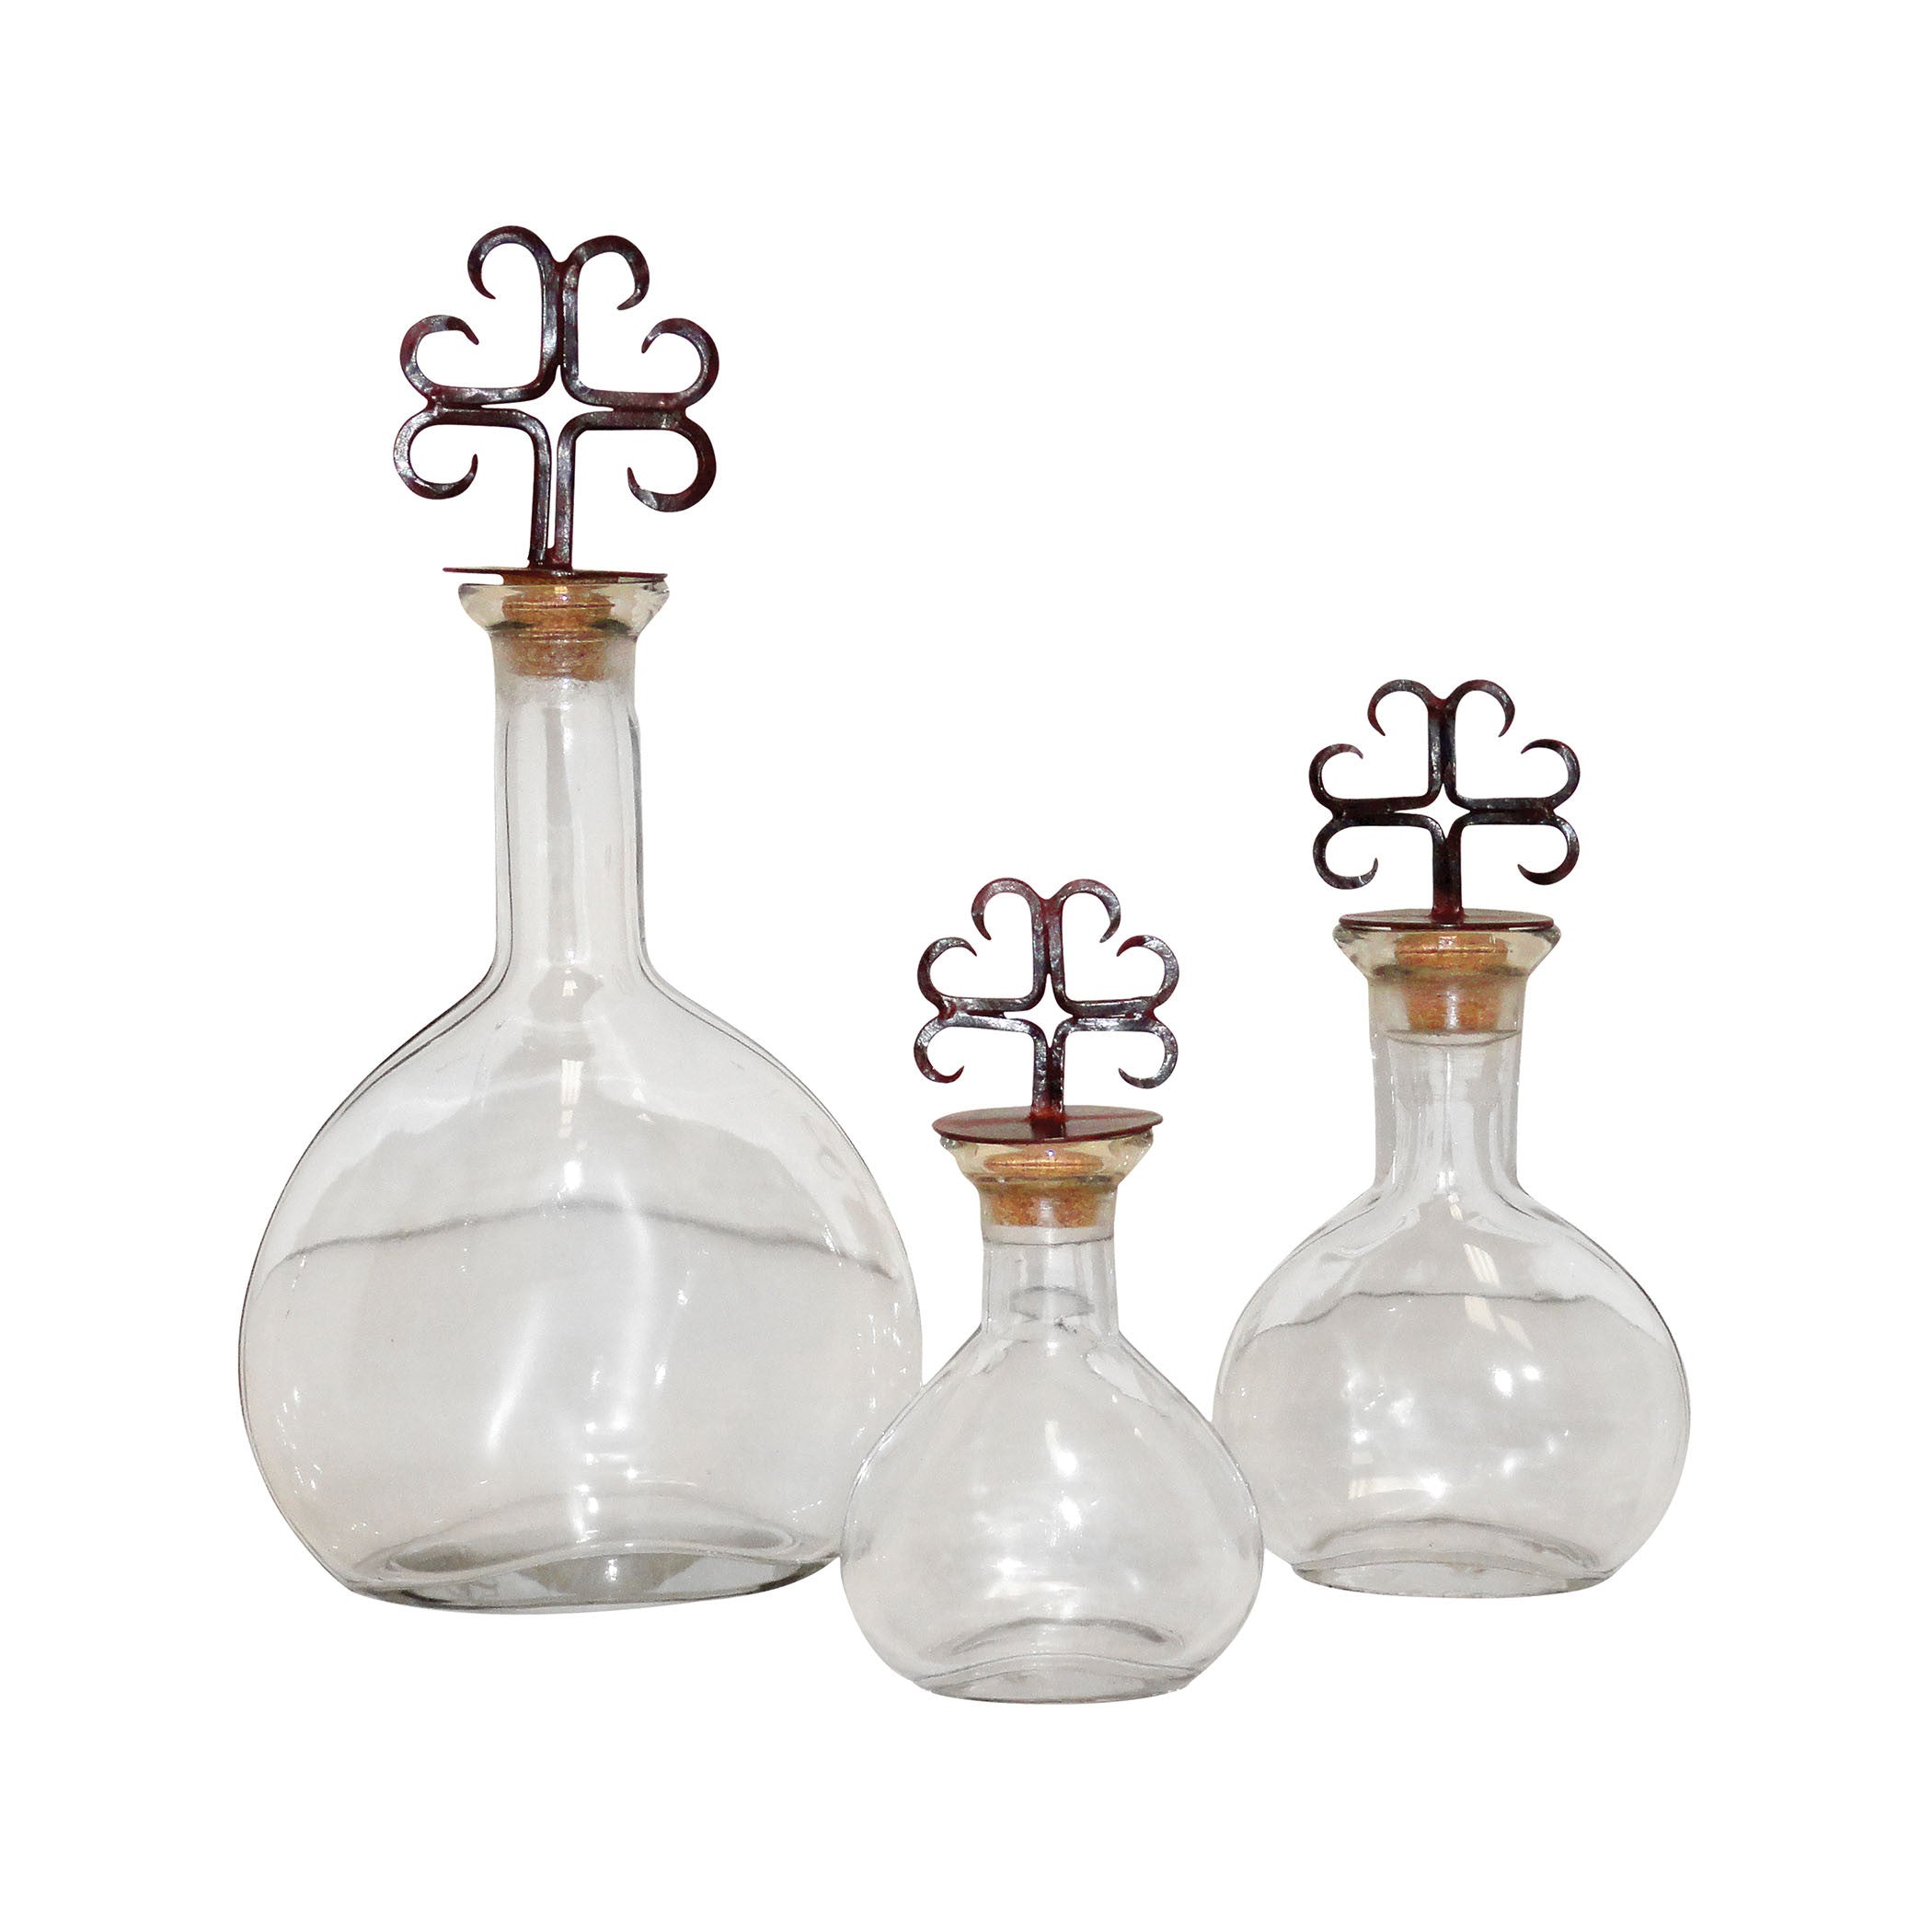 Pomeroy Pom-617539 Tejas Collection Montana Rustic,clear Finish Accessory